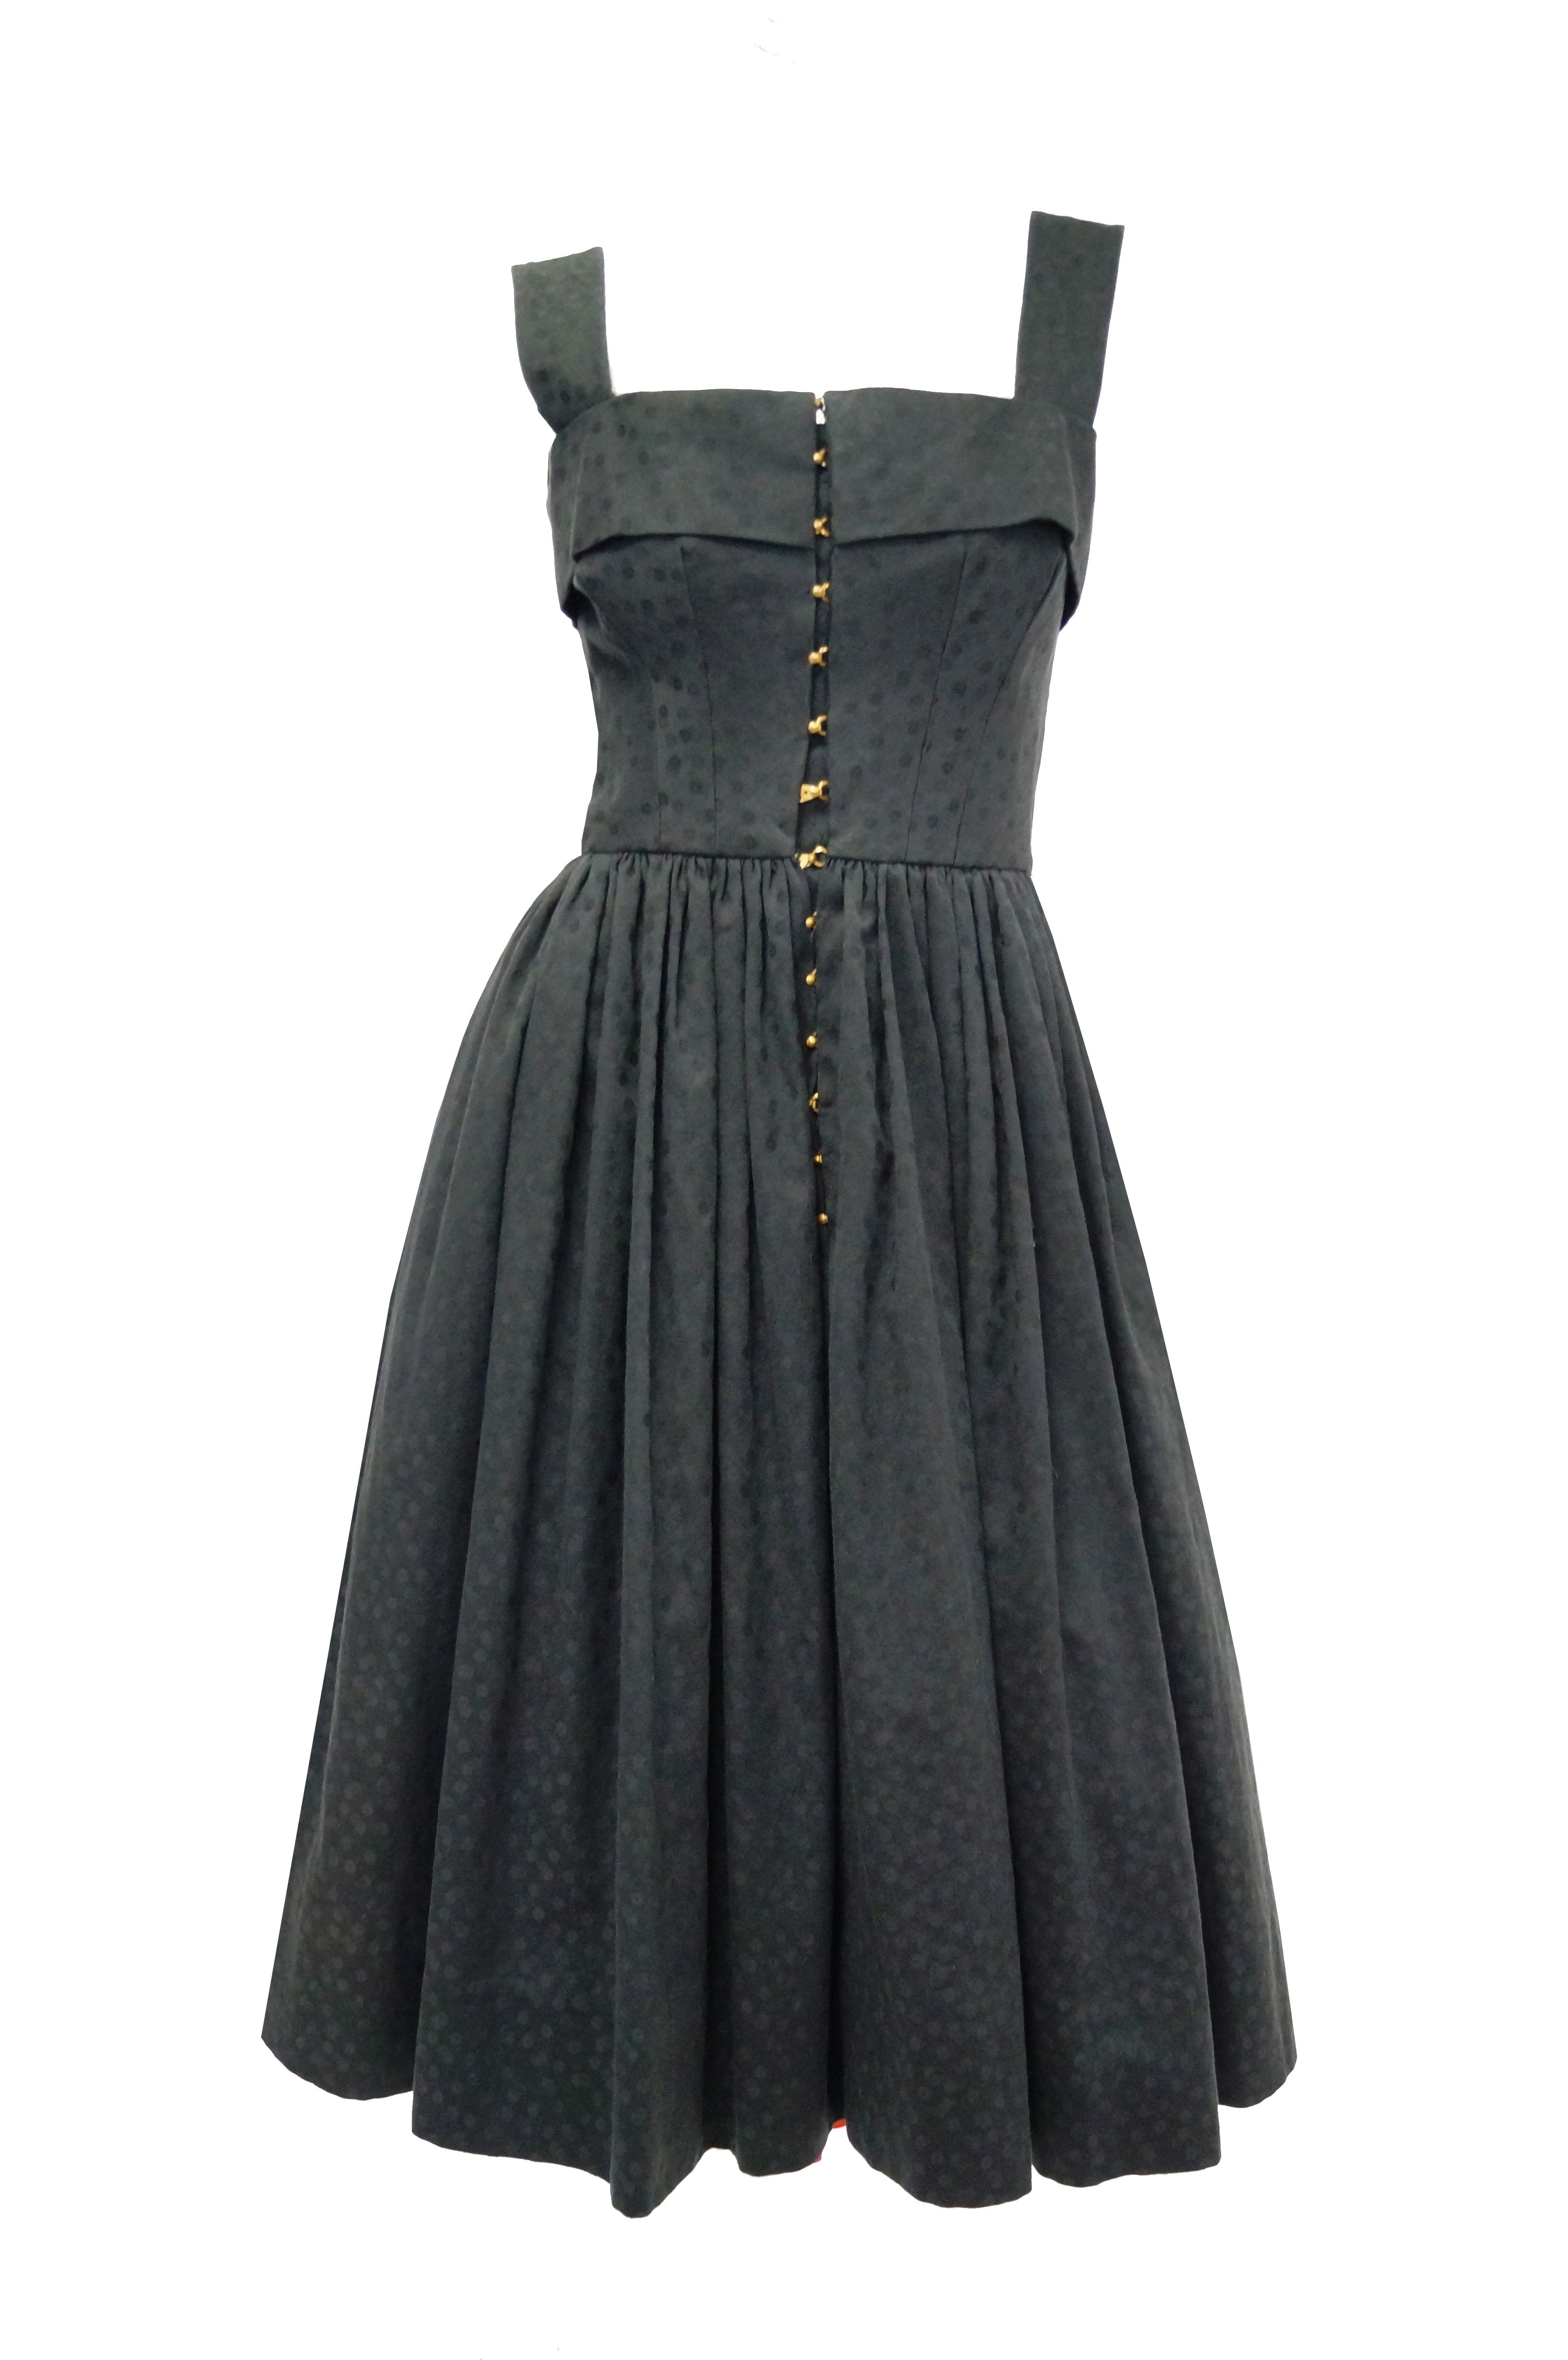 1940s Claire McCardell Black Cotton Dotted Dress with Metal Closures ...